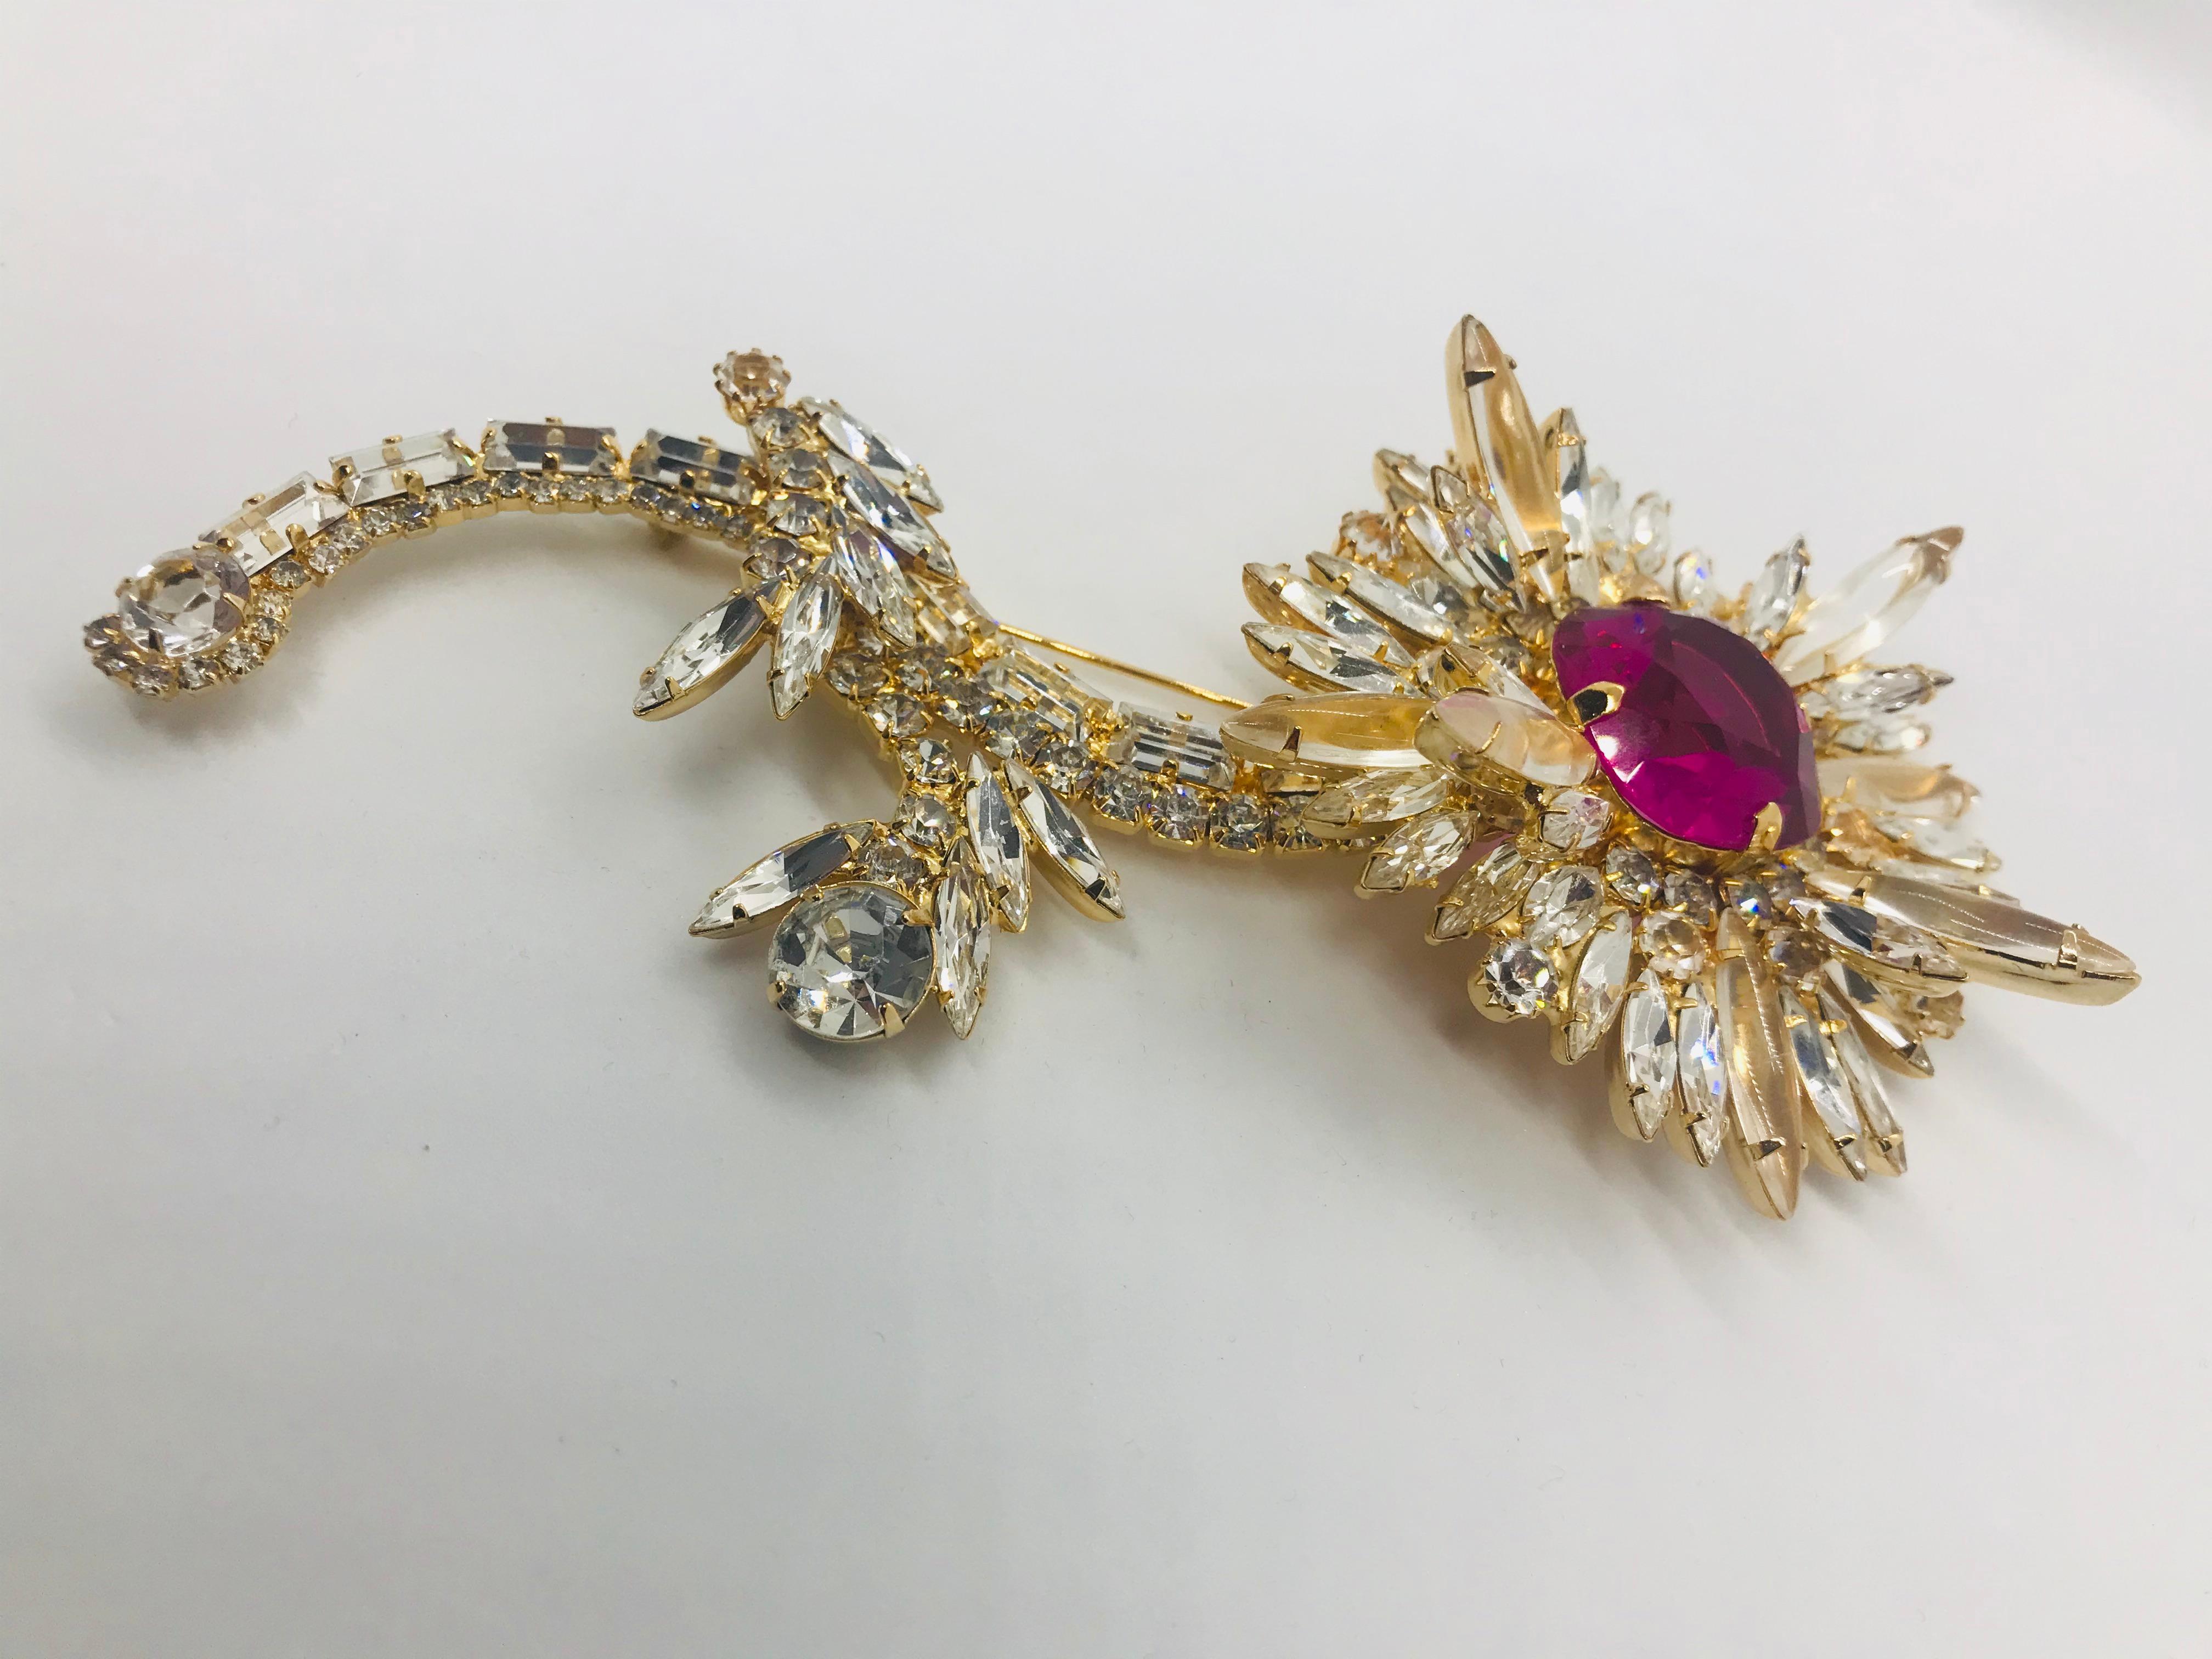 Based on a famous floral brooch from Queen Elizabeth's jewelry collection, our vintage fuchsia Swarovski crystal and clear Austrian crystal floral spray brooch is a 